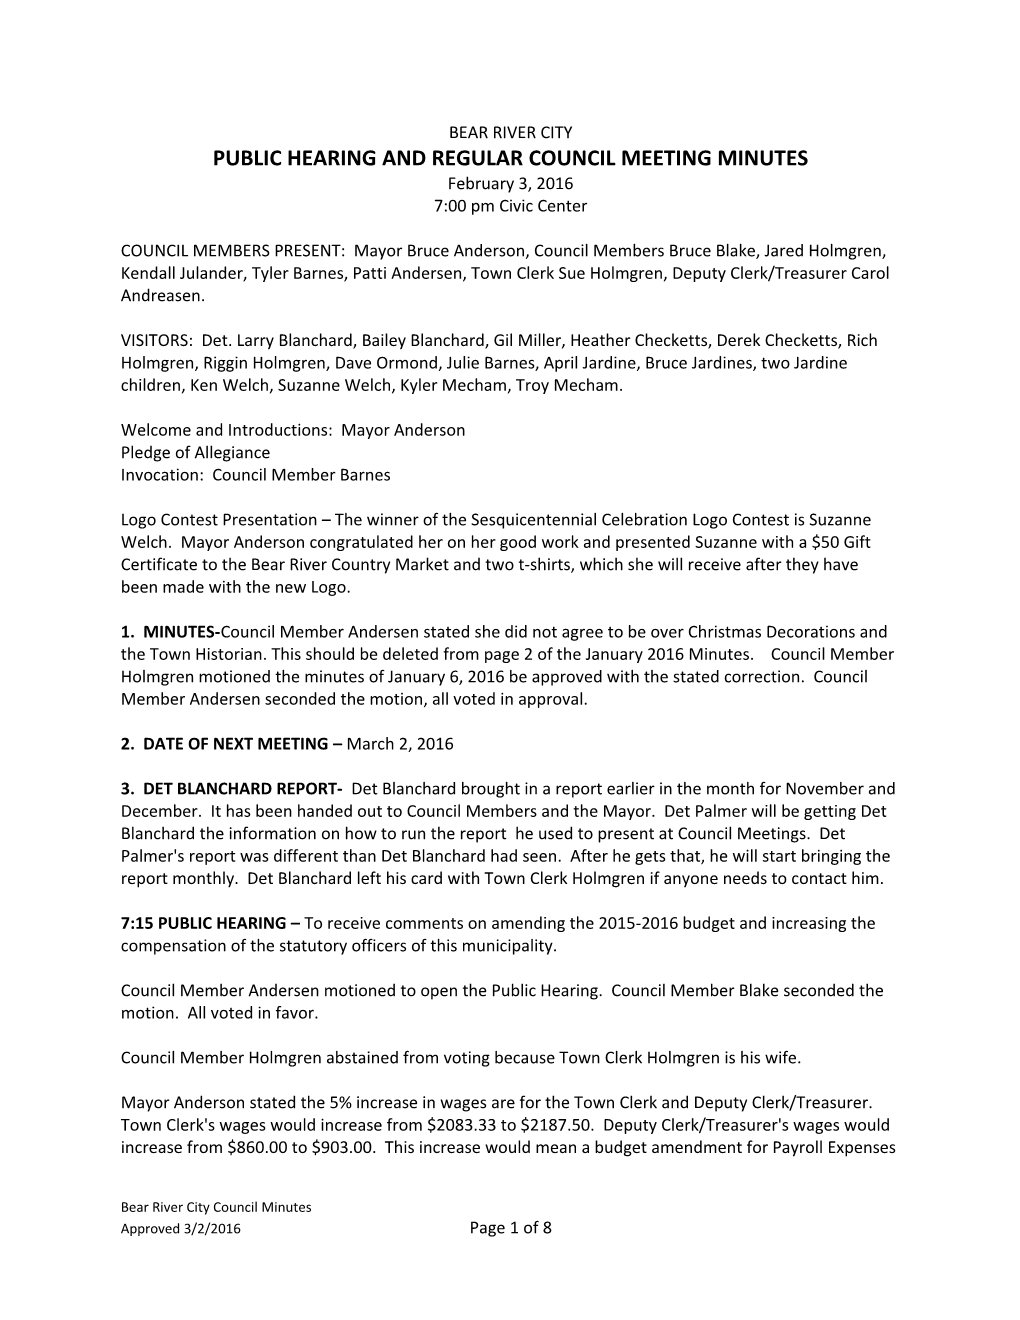 Public Hearing and Regular Council Meeting Minutes